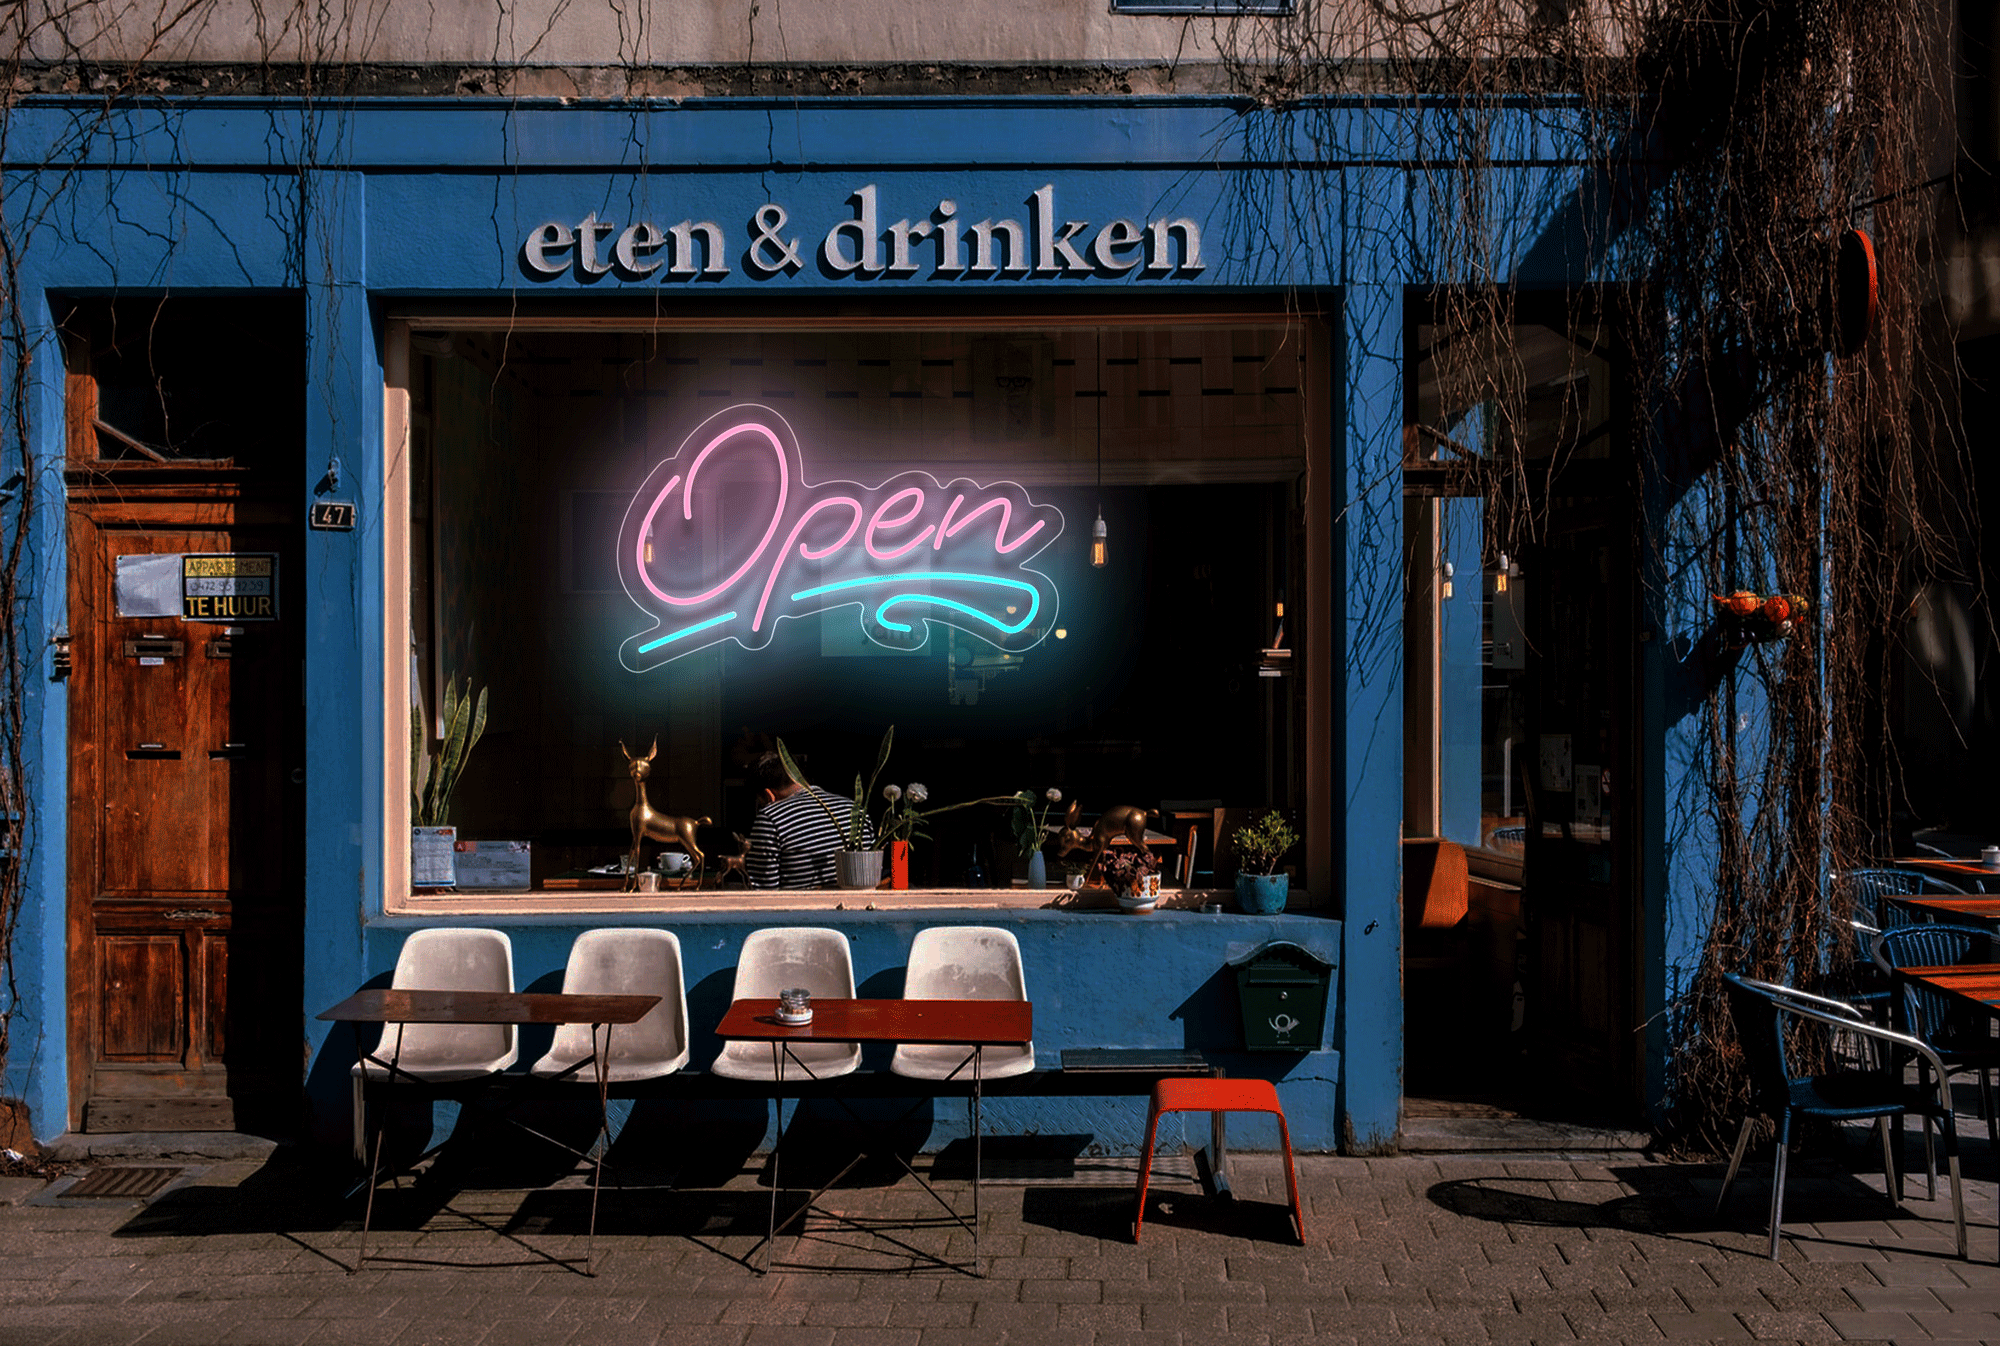 "Open" with Squiggle Line LED Neon Sign